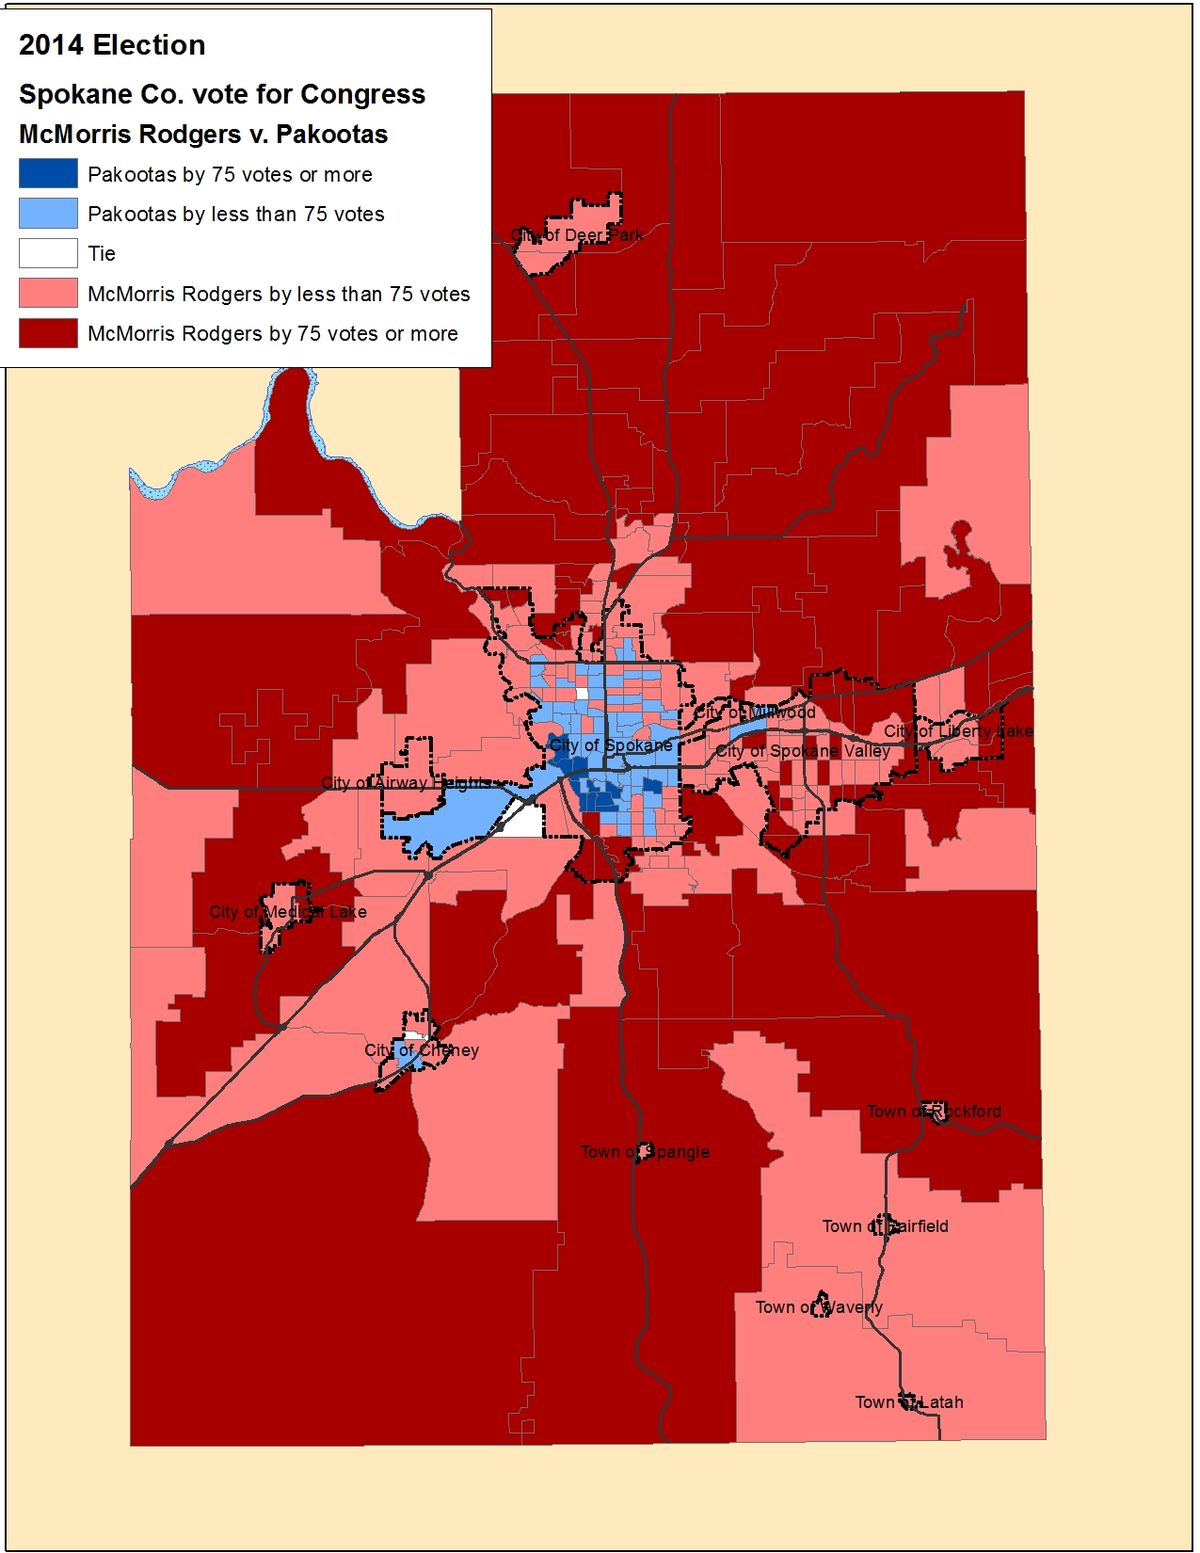 Mapping the vote Spokane County votes for Congress The SpokesmanReview